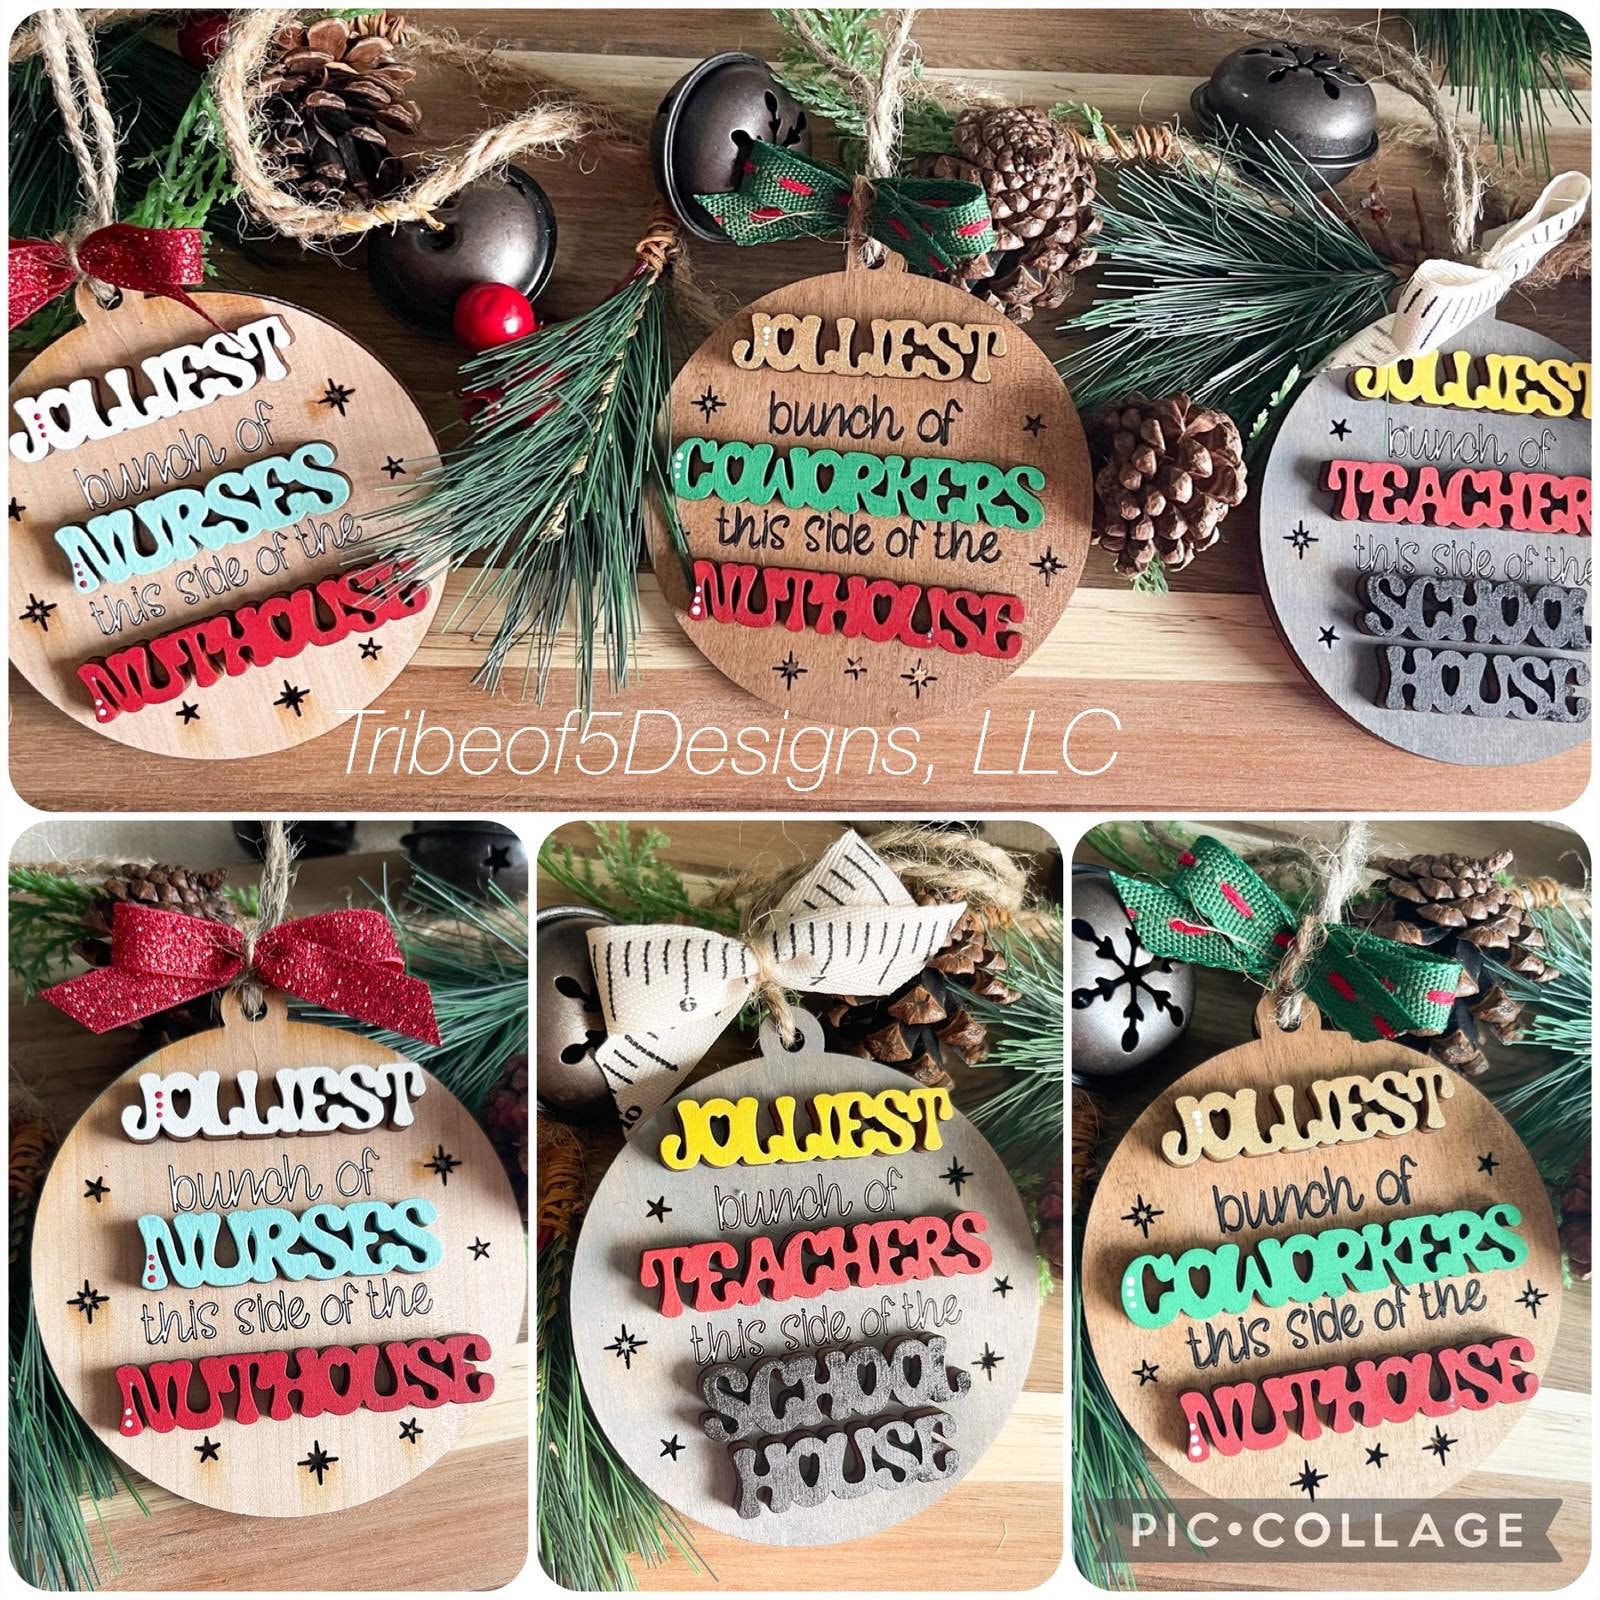 Meuva Love Letters Ornaments Wedding Red Square Ornaments Home Couples Wooden Crafts Decoration Sister Ornament Christmas Ball Set Teacher Ornament